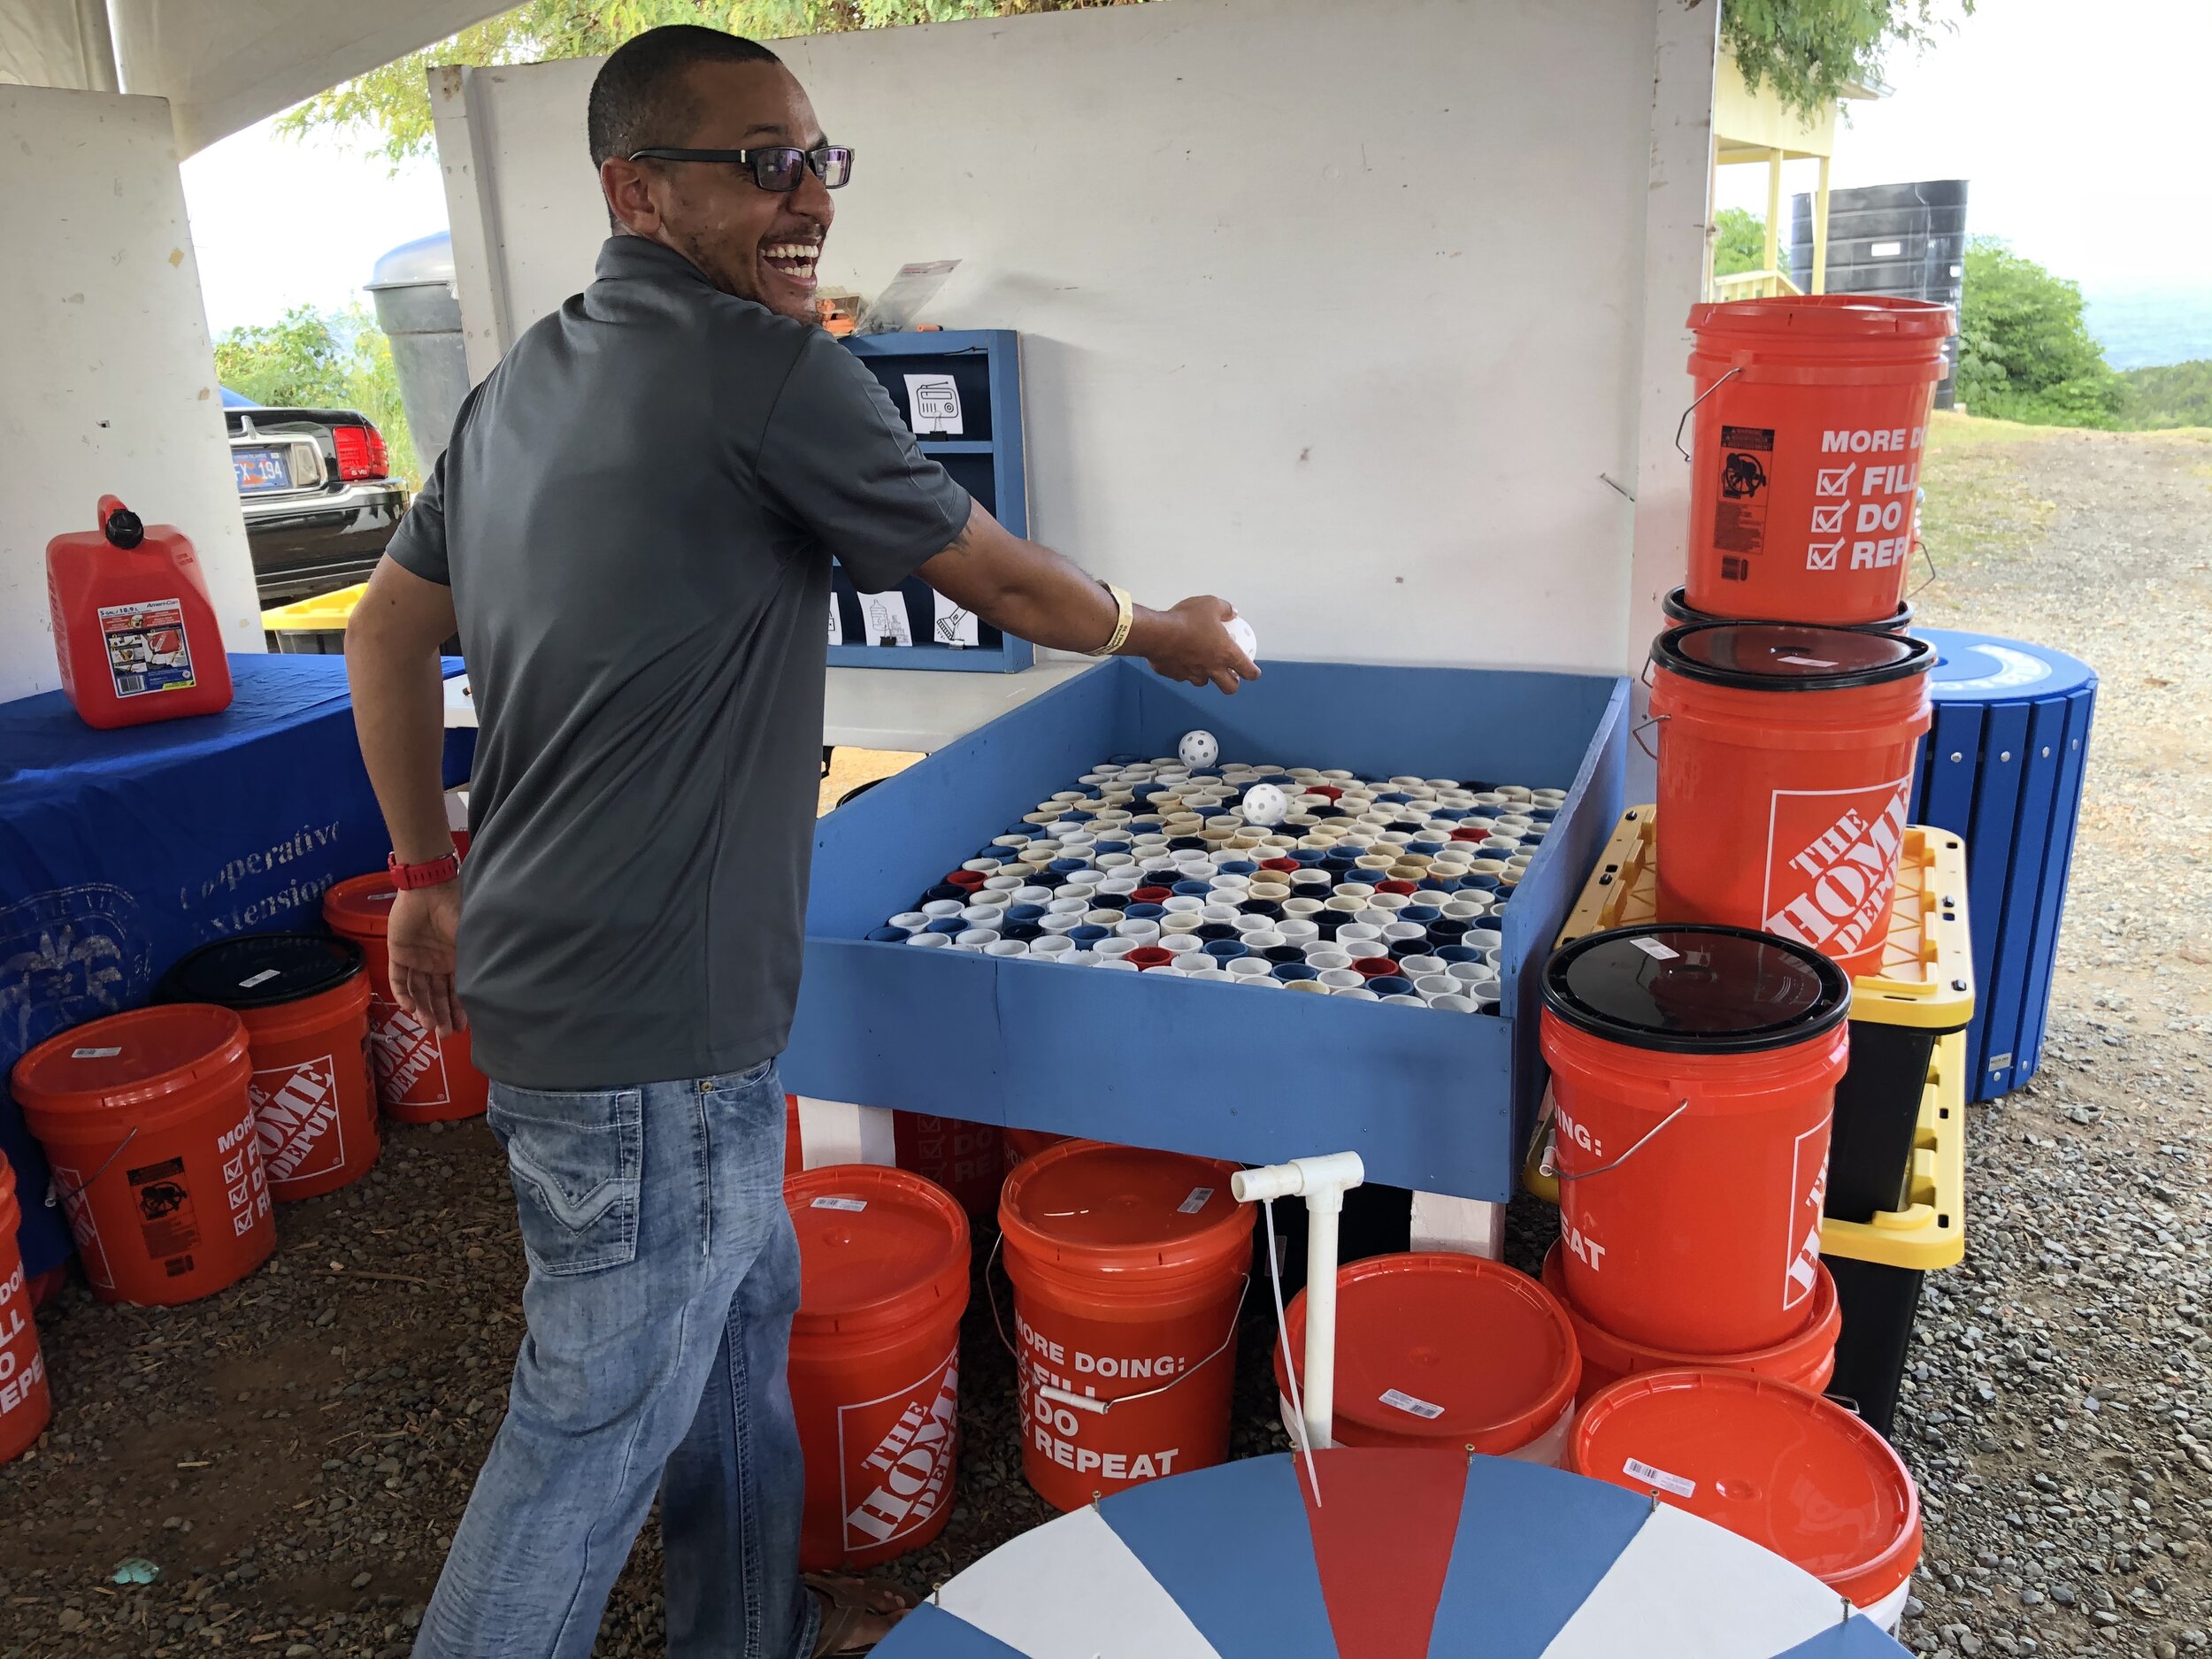  Howard Forbes, Jr. St. Thomas/St. John Coordinator for the Virgin Islands Marine Advisory Service demonstrates how to play the carnival-themed games created for the supply distribution CTP at the 2019 St. Thomas &amp; St. John Agricultural Fair. Pho